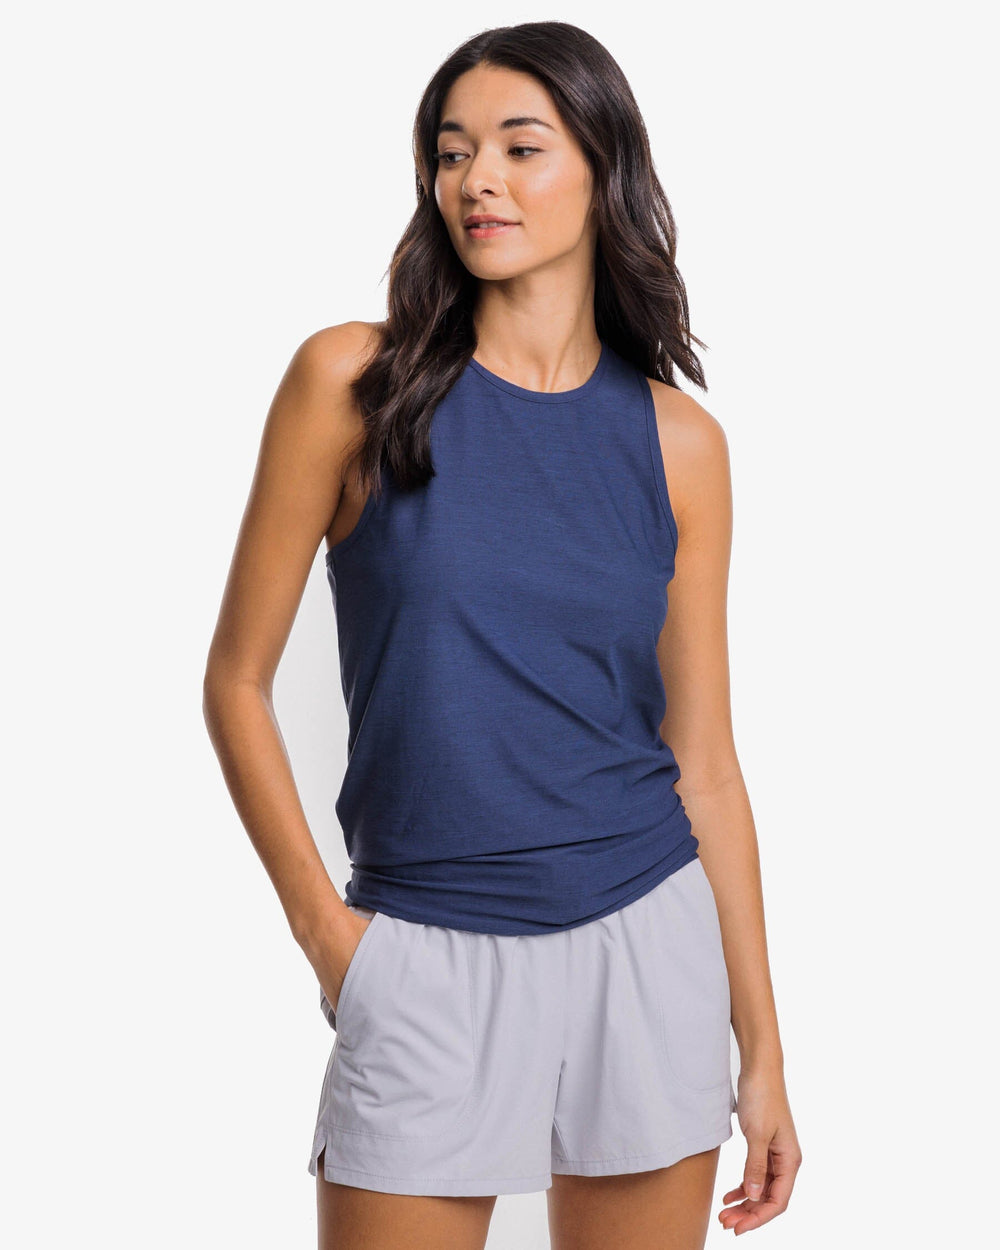 The front view of the Southern Tide Cora brrr illiant Tie Back Tank by Southern Tide - Nautical Navy